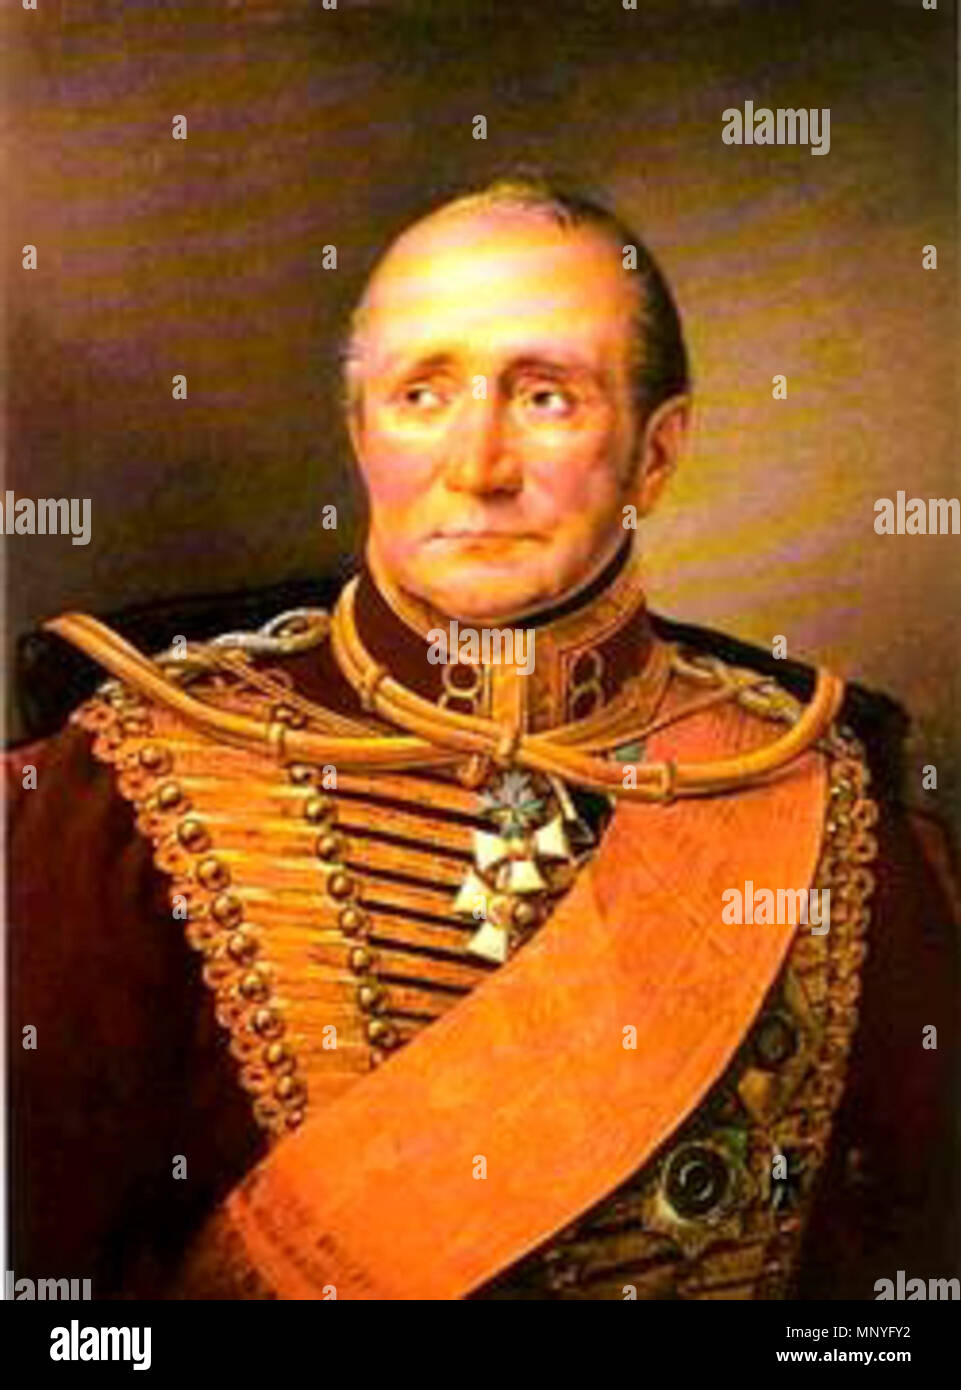 . English: Hans Ernst Karl, Graf von Zieten (5 March 1770 – 3 May 1848) was a General in the Prussian Army during the Napoleonic Wars Русский: Цитен, Ганс Эрнст Карл фон (5.3.1770 - 3.5.1848, Вармбрунн), граф, генерал-фельдмаршал . before 1848.   Franz Krüger  (1797–1857)     Description German painter, graphic artist, cartoonist and lithographer  Date of birth/death 3 September 1797 / 10 September 1797 21 January 1857  Location of birth/death Radegast Berlin  Work location Berlin, Saint Petersburg, Dessau  Authority control  : Q568298 VIAF: 37180865 ISNI: 0000 0000 6657 6409 ULAN: 500009243 L Stock Photo